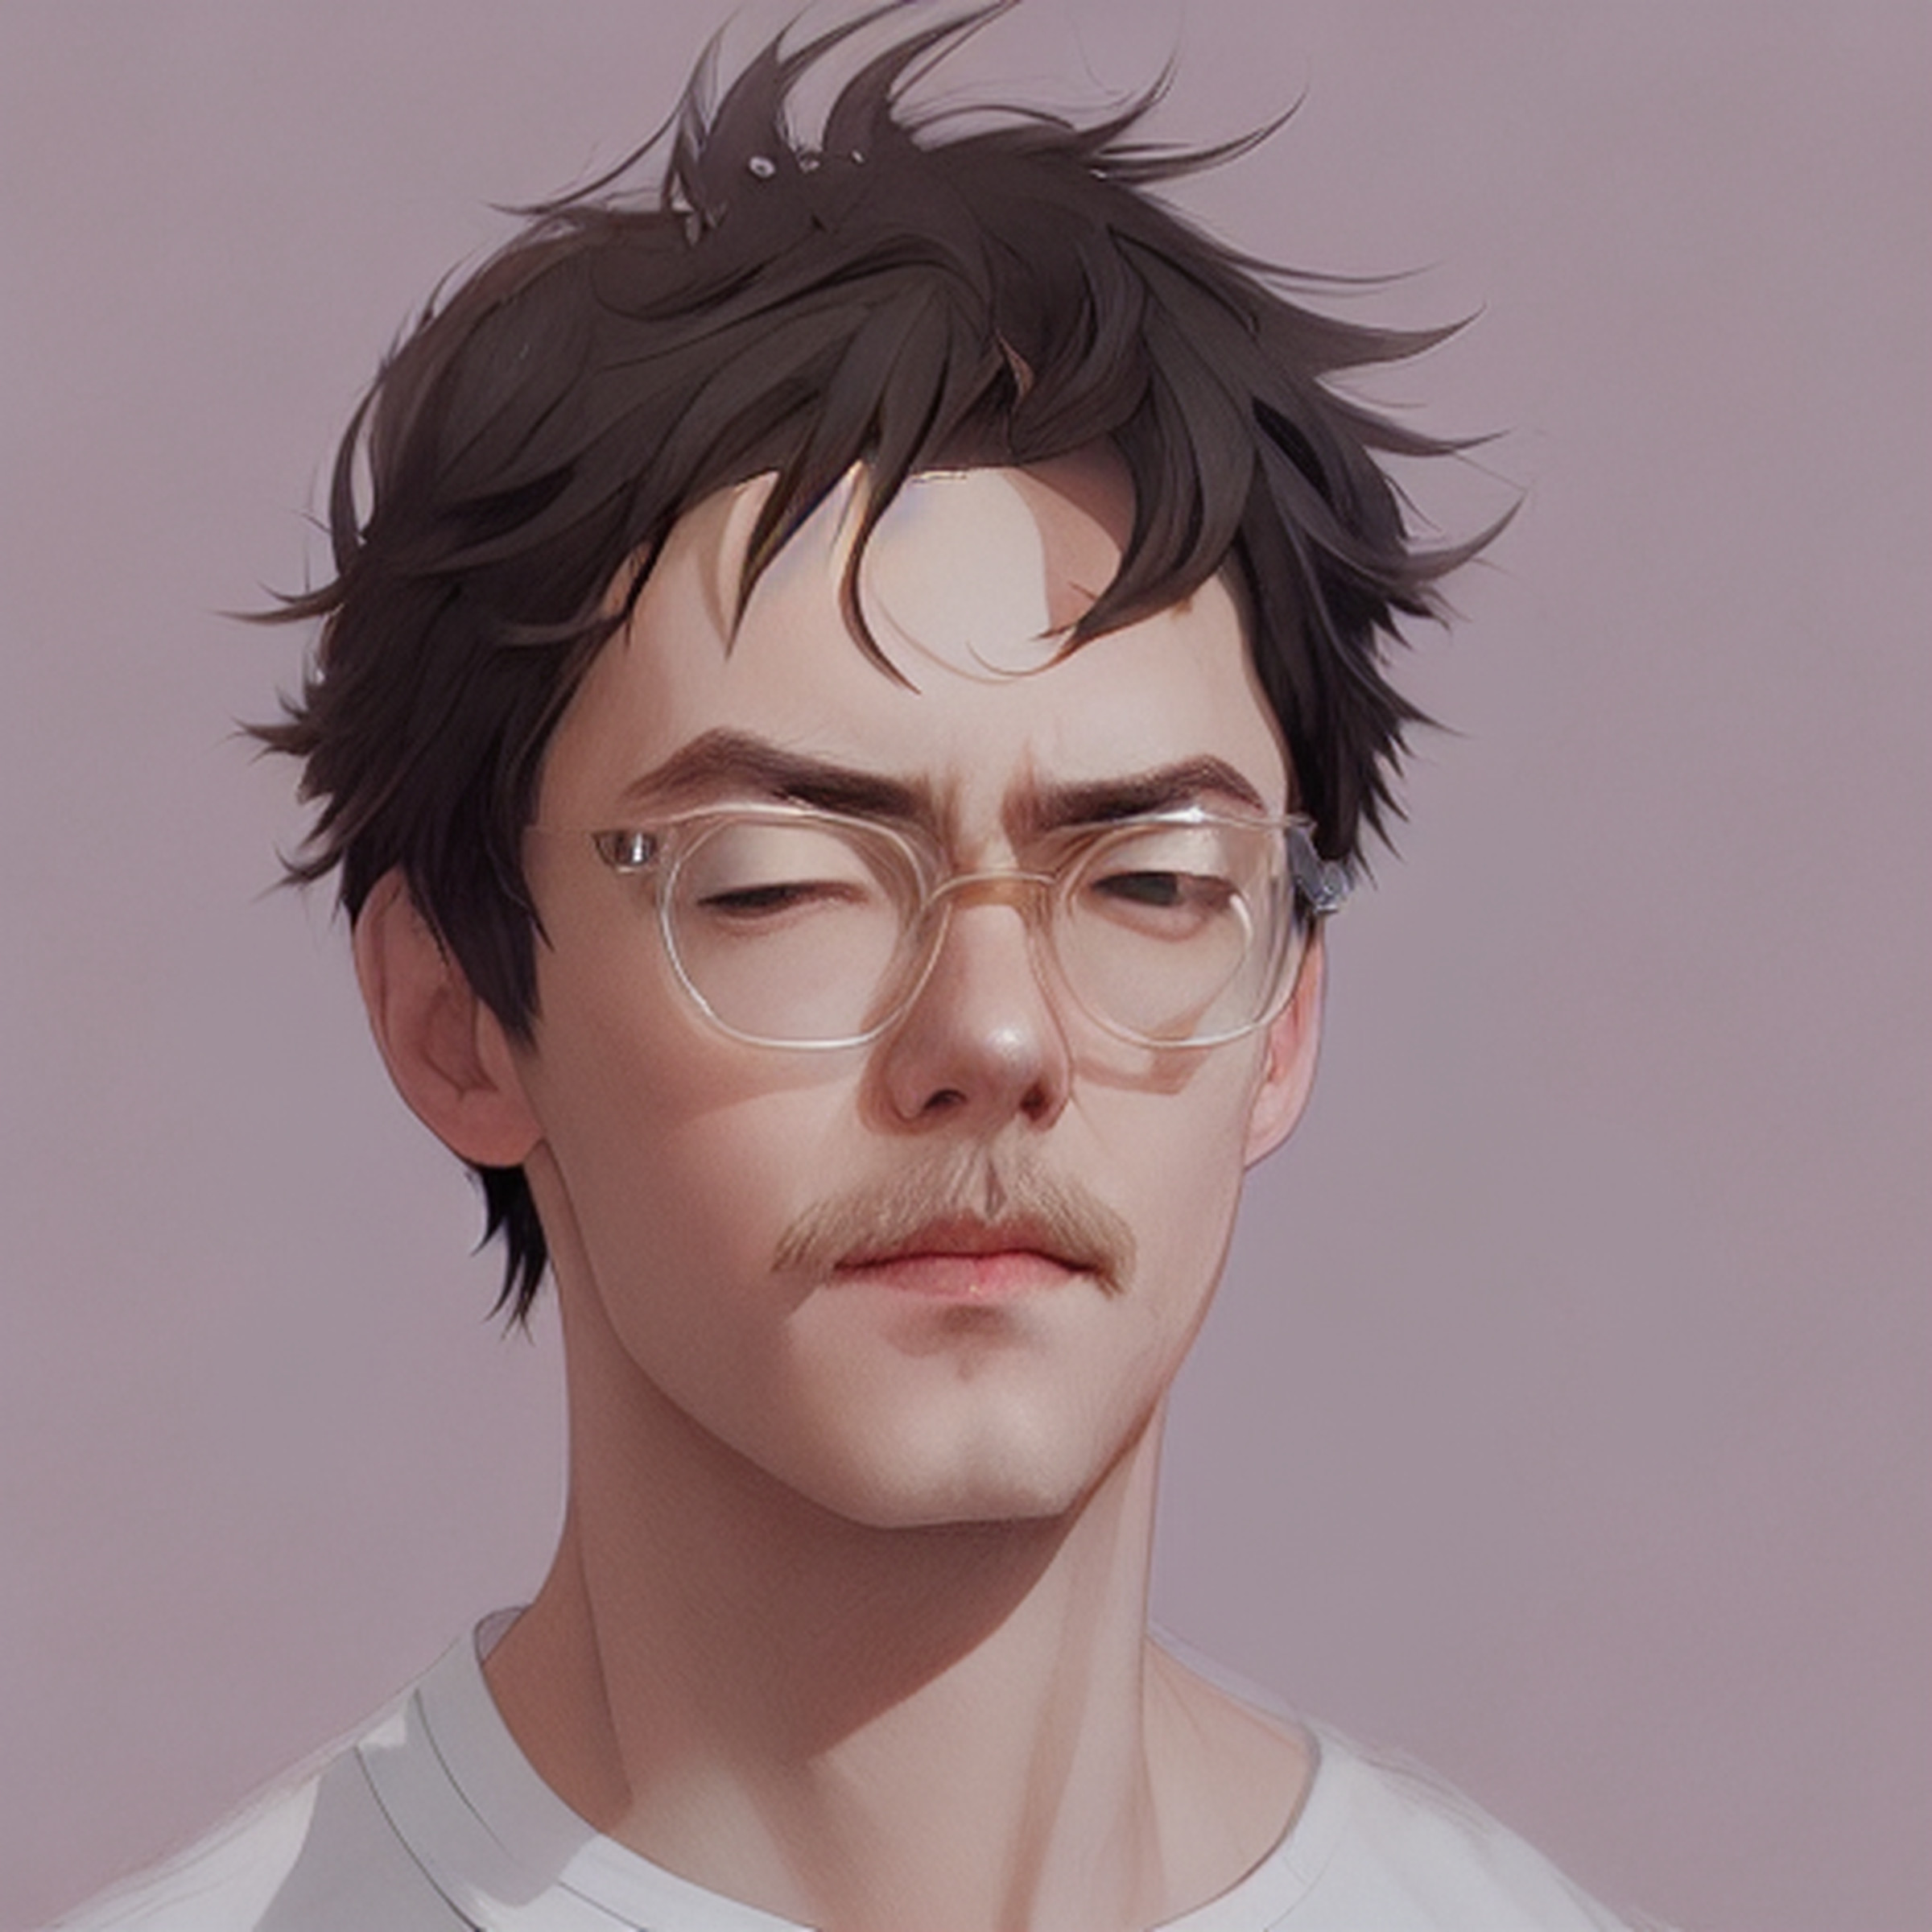 An AI-generated digital painting of a white male in an anime style.